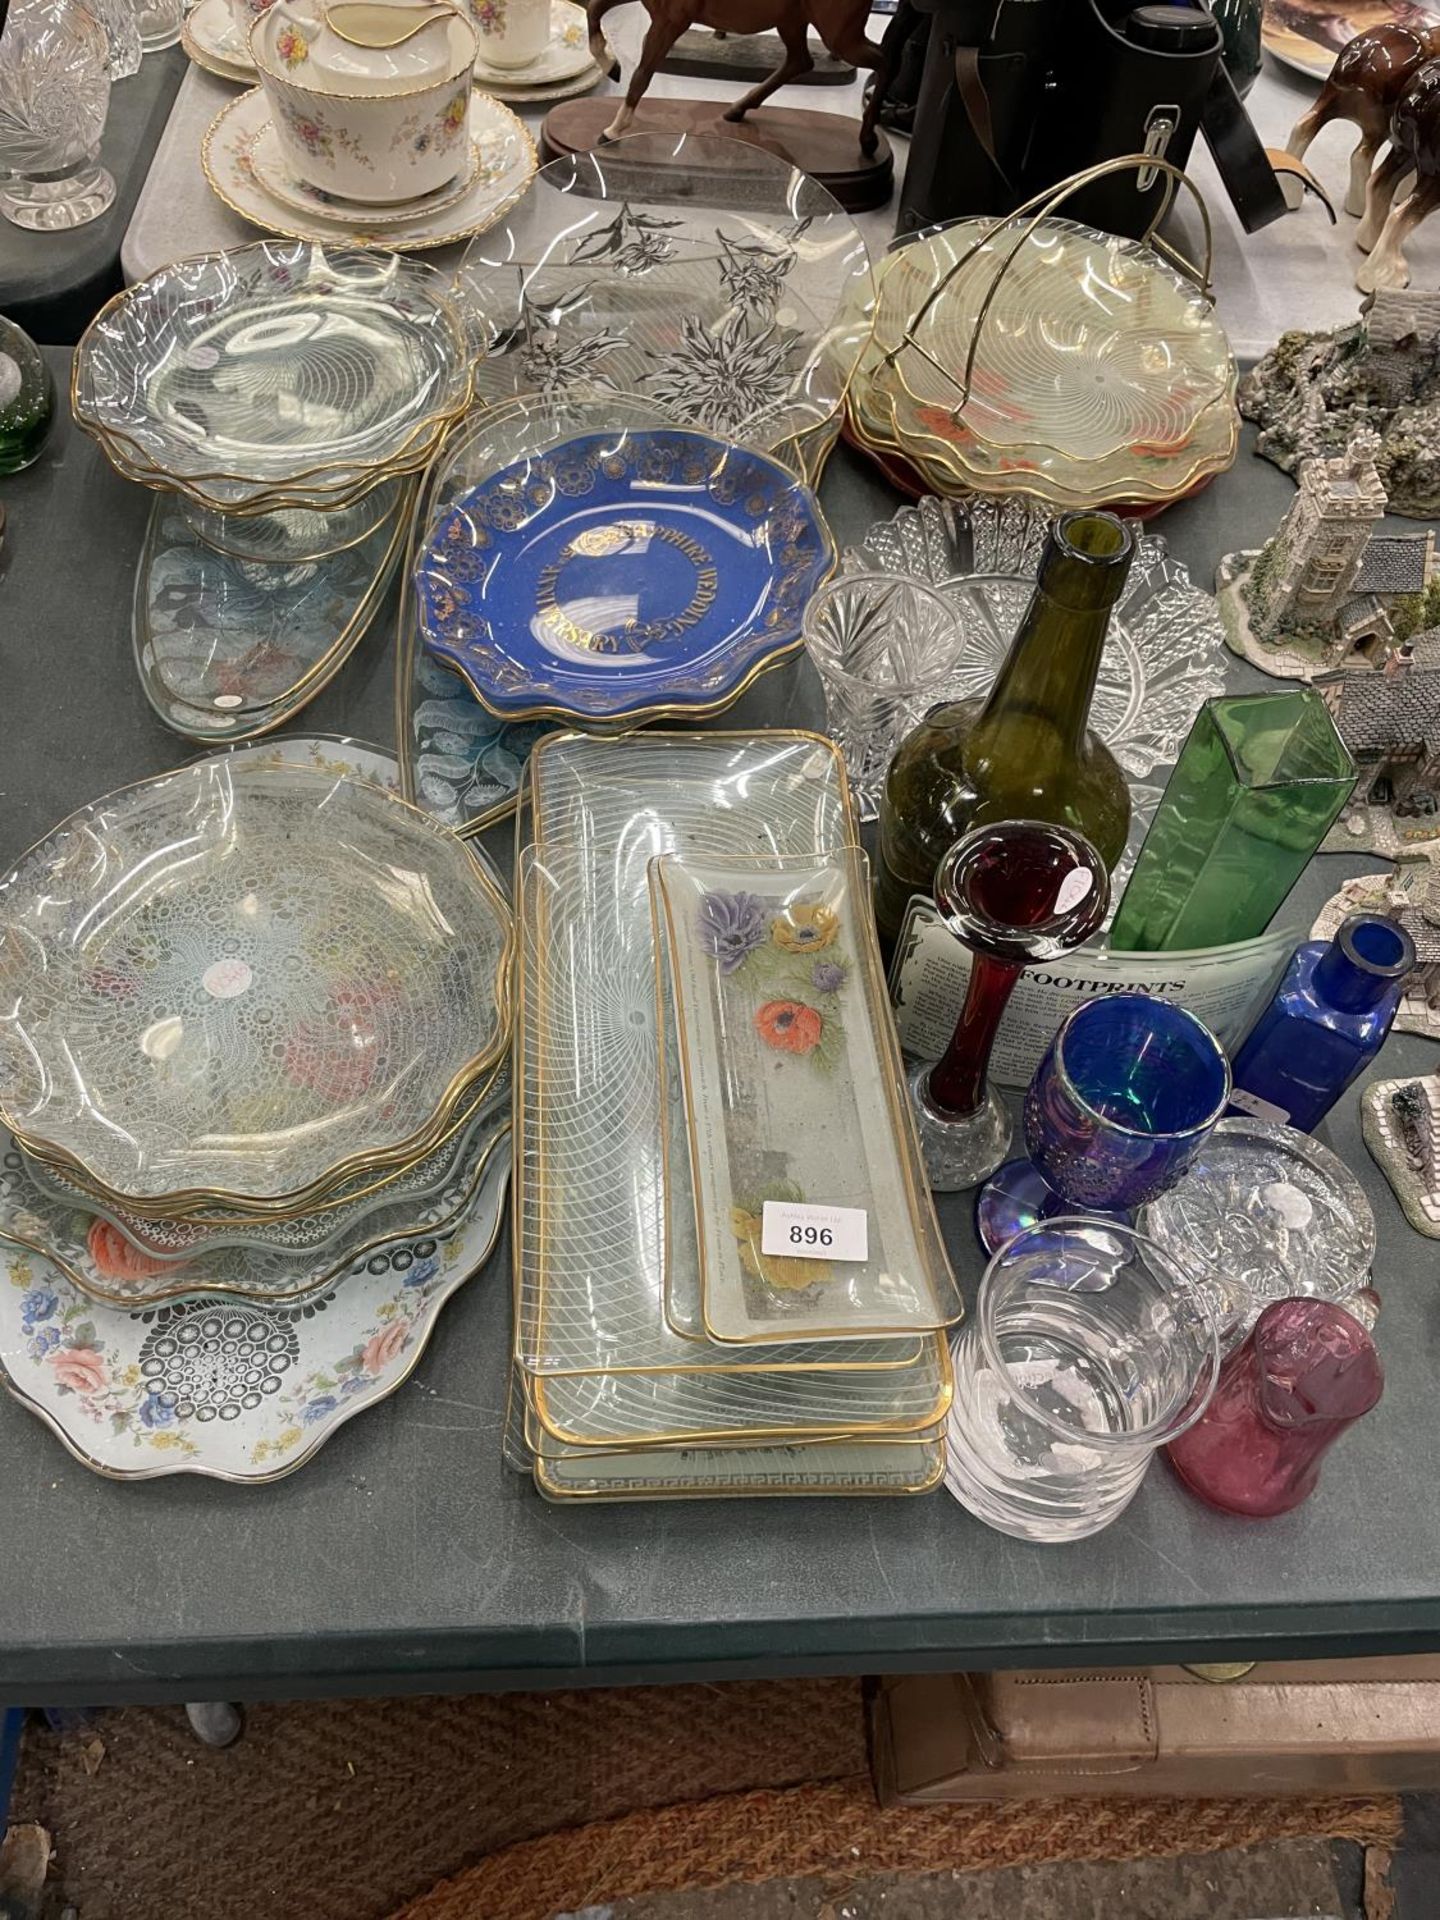 A LARGE QUANTITY OF PATTERNED GLASSWARE PLATES AND SANDWICH TRAYS, ETC